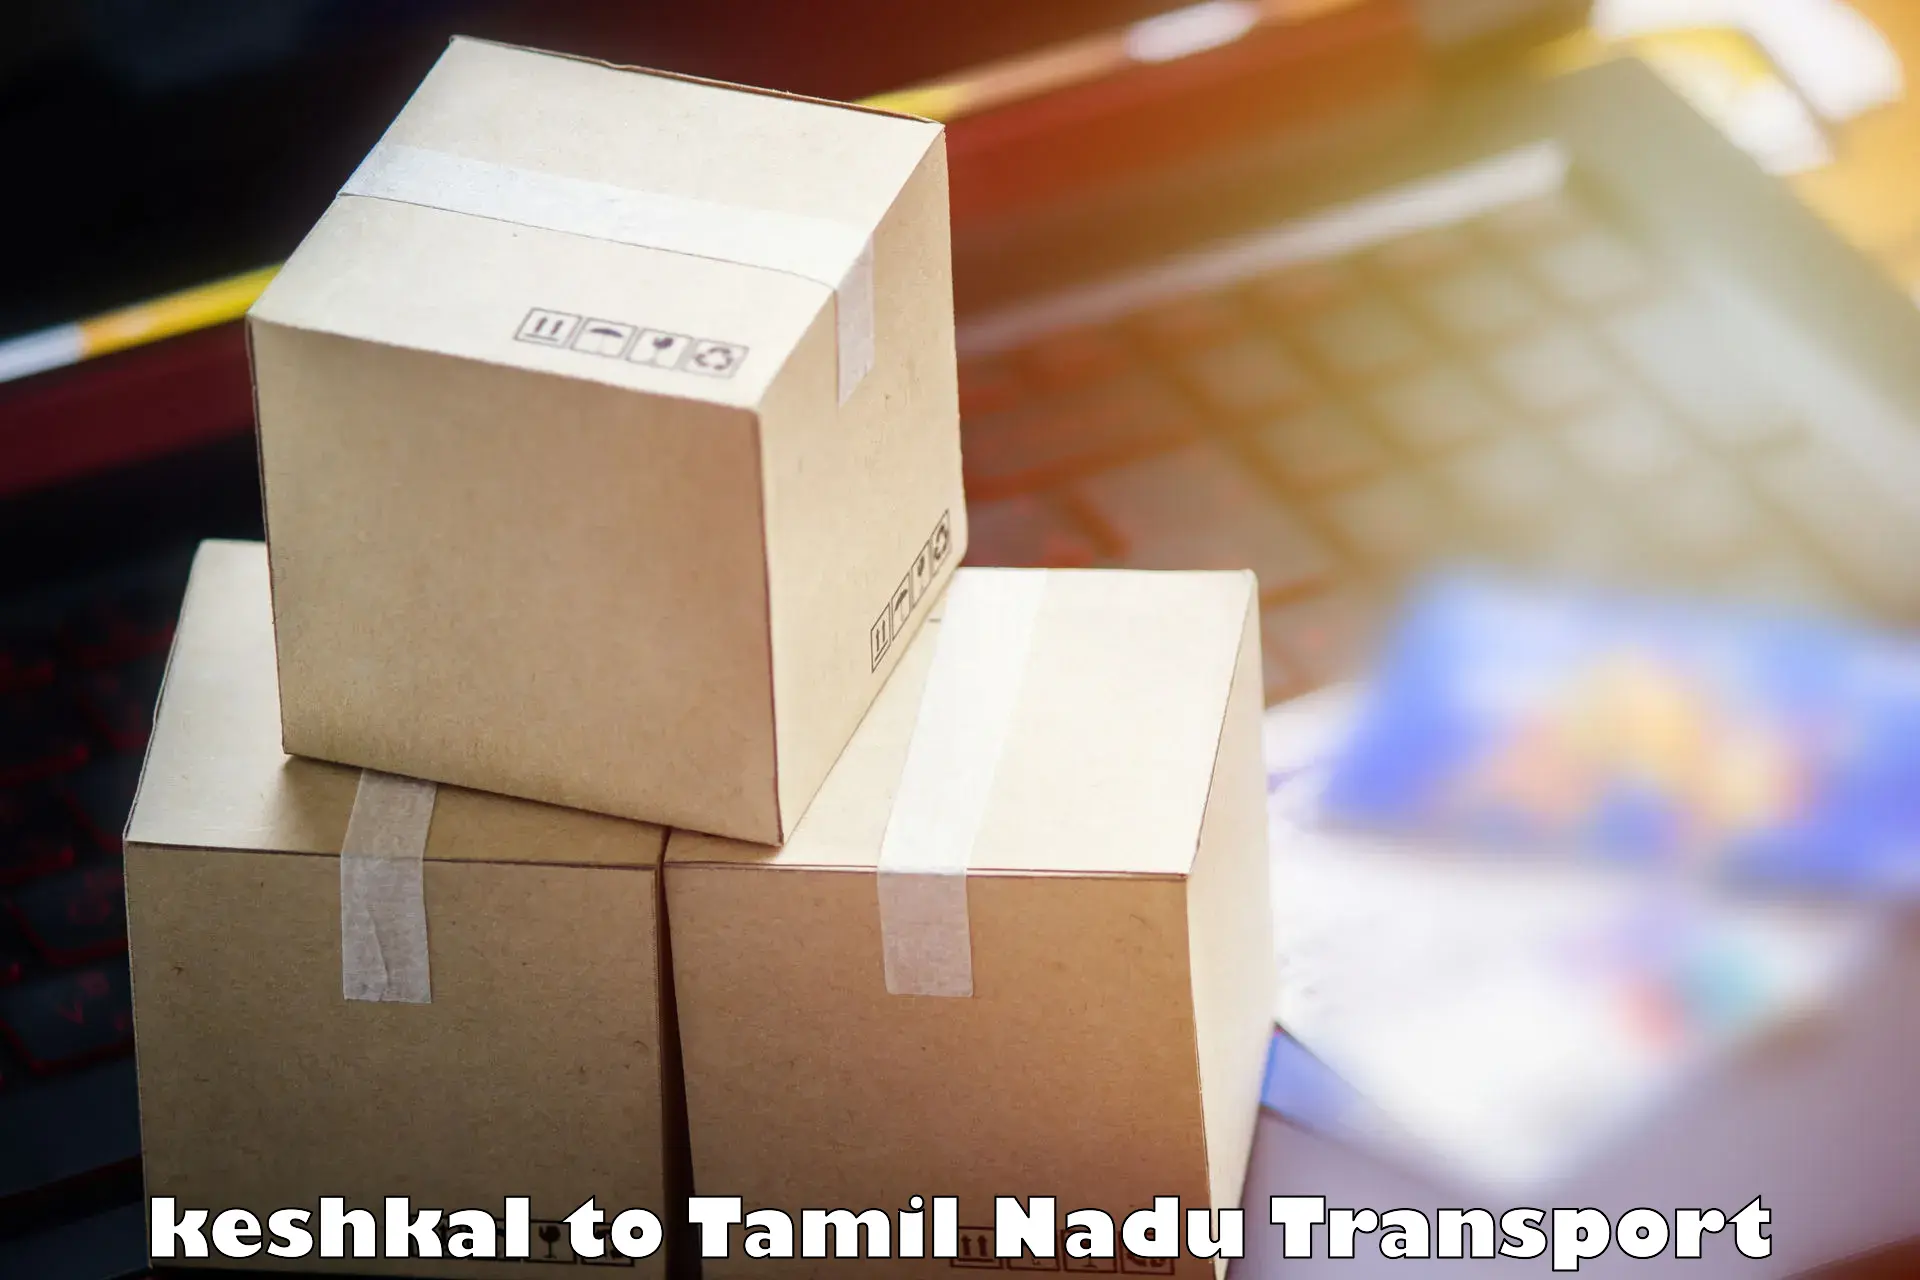 India truck logistics services in keshkal to Chennai